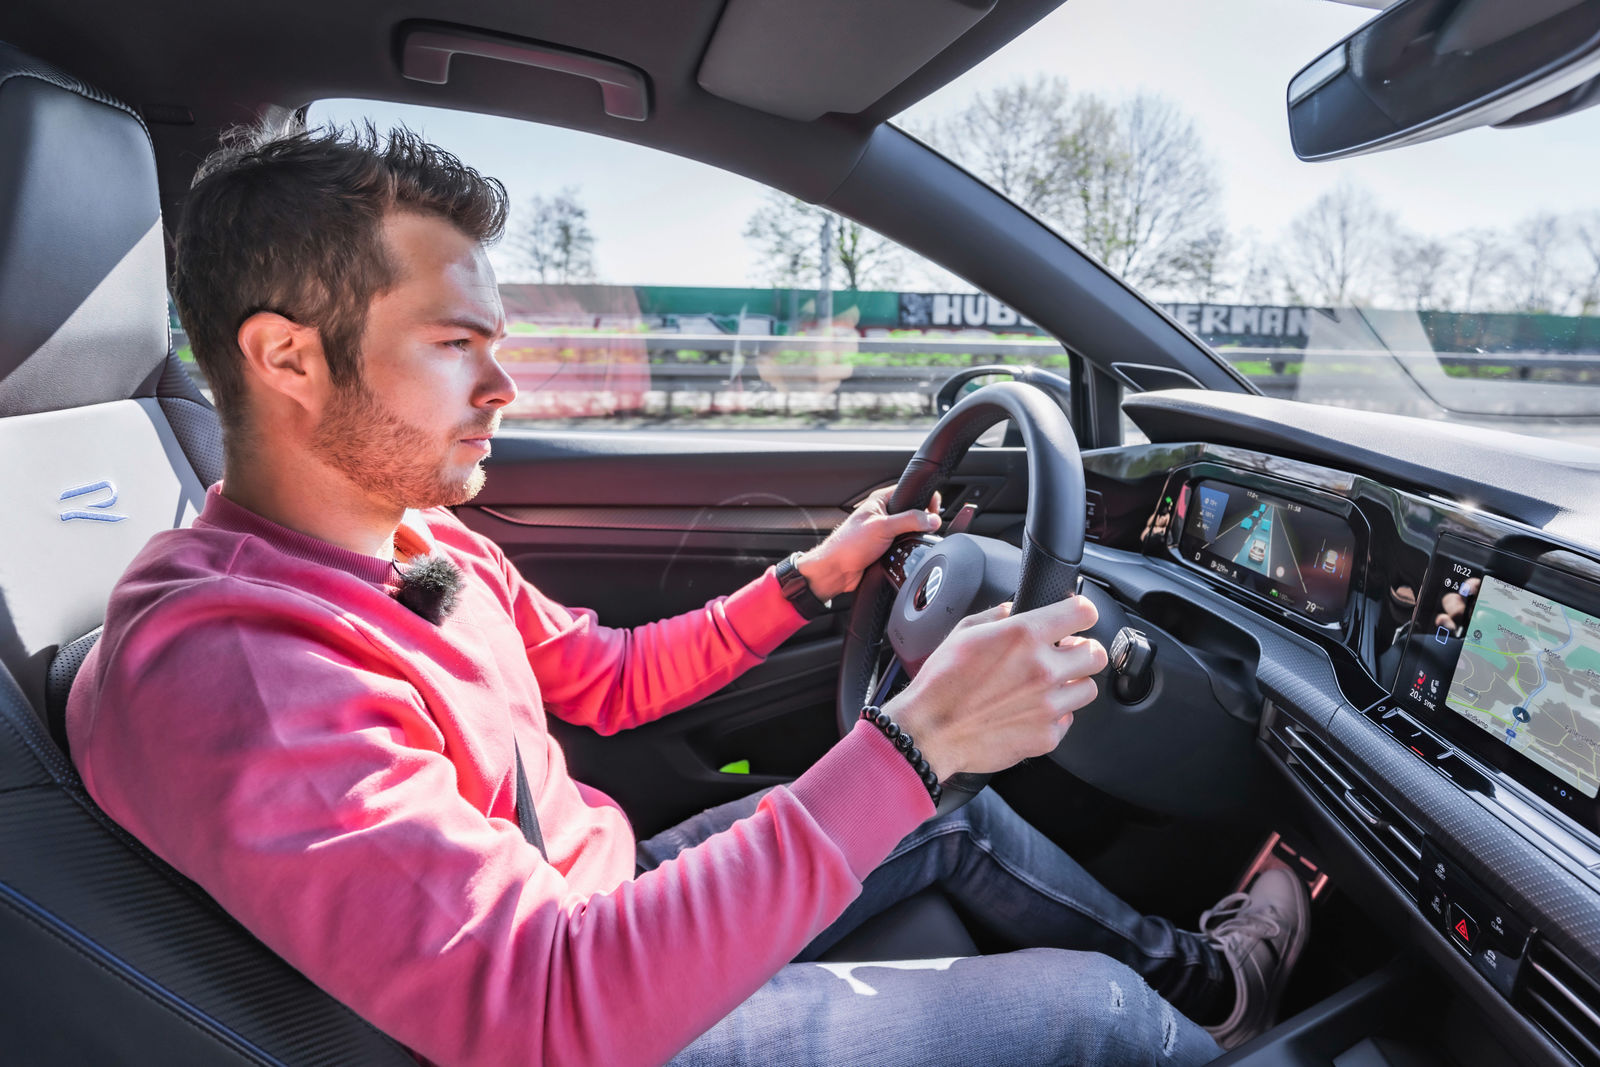 Story "What pro racer Benjamin Leuchter really appreciates about his Golf R is the assistance systems and the Travel Assist surroundings display."